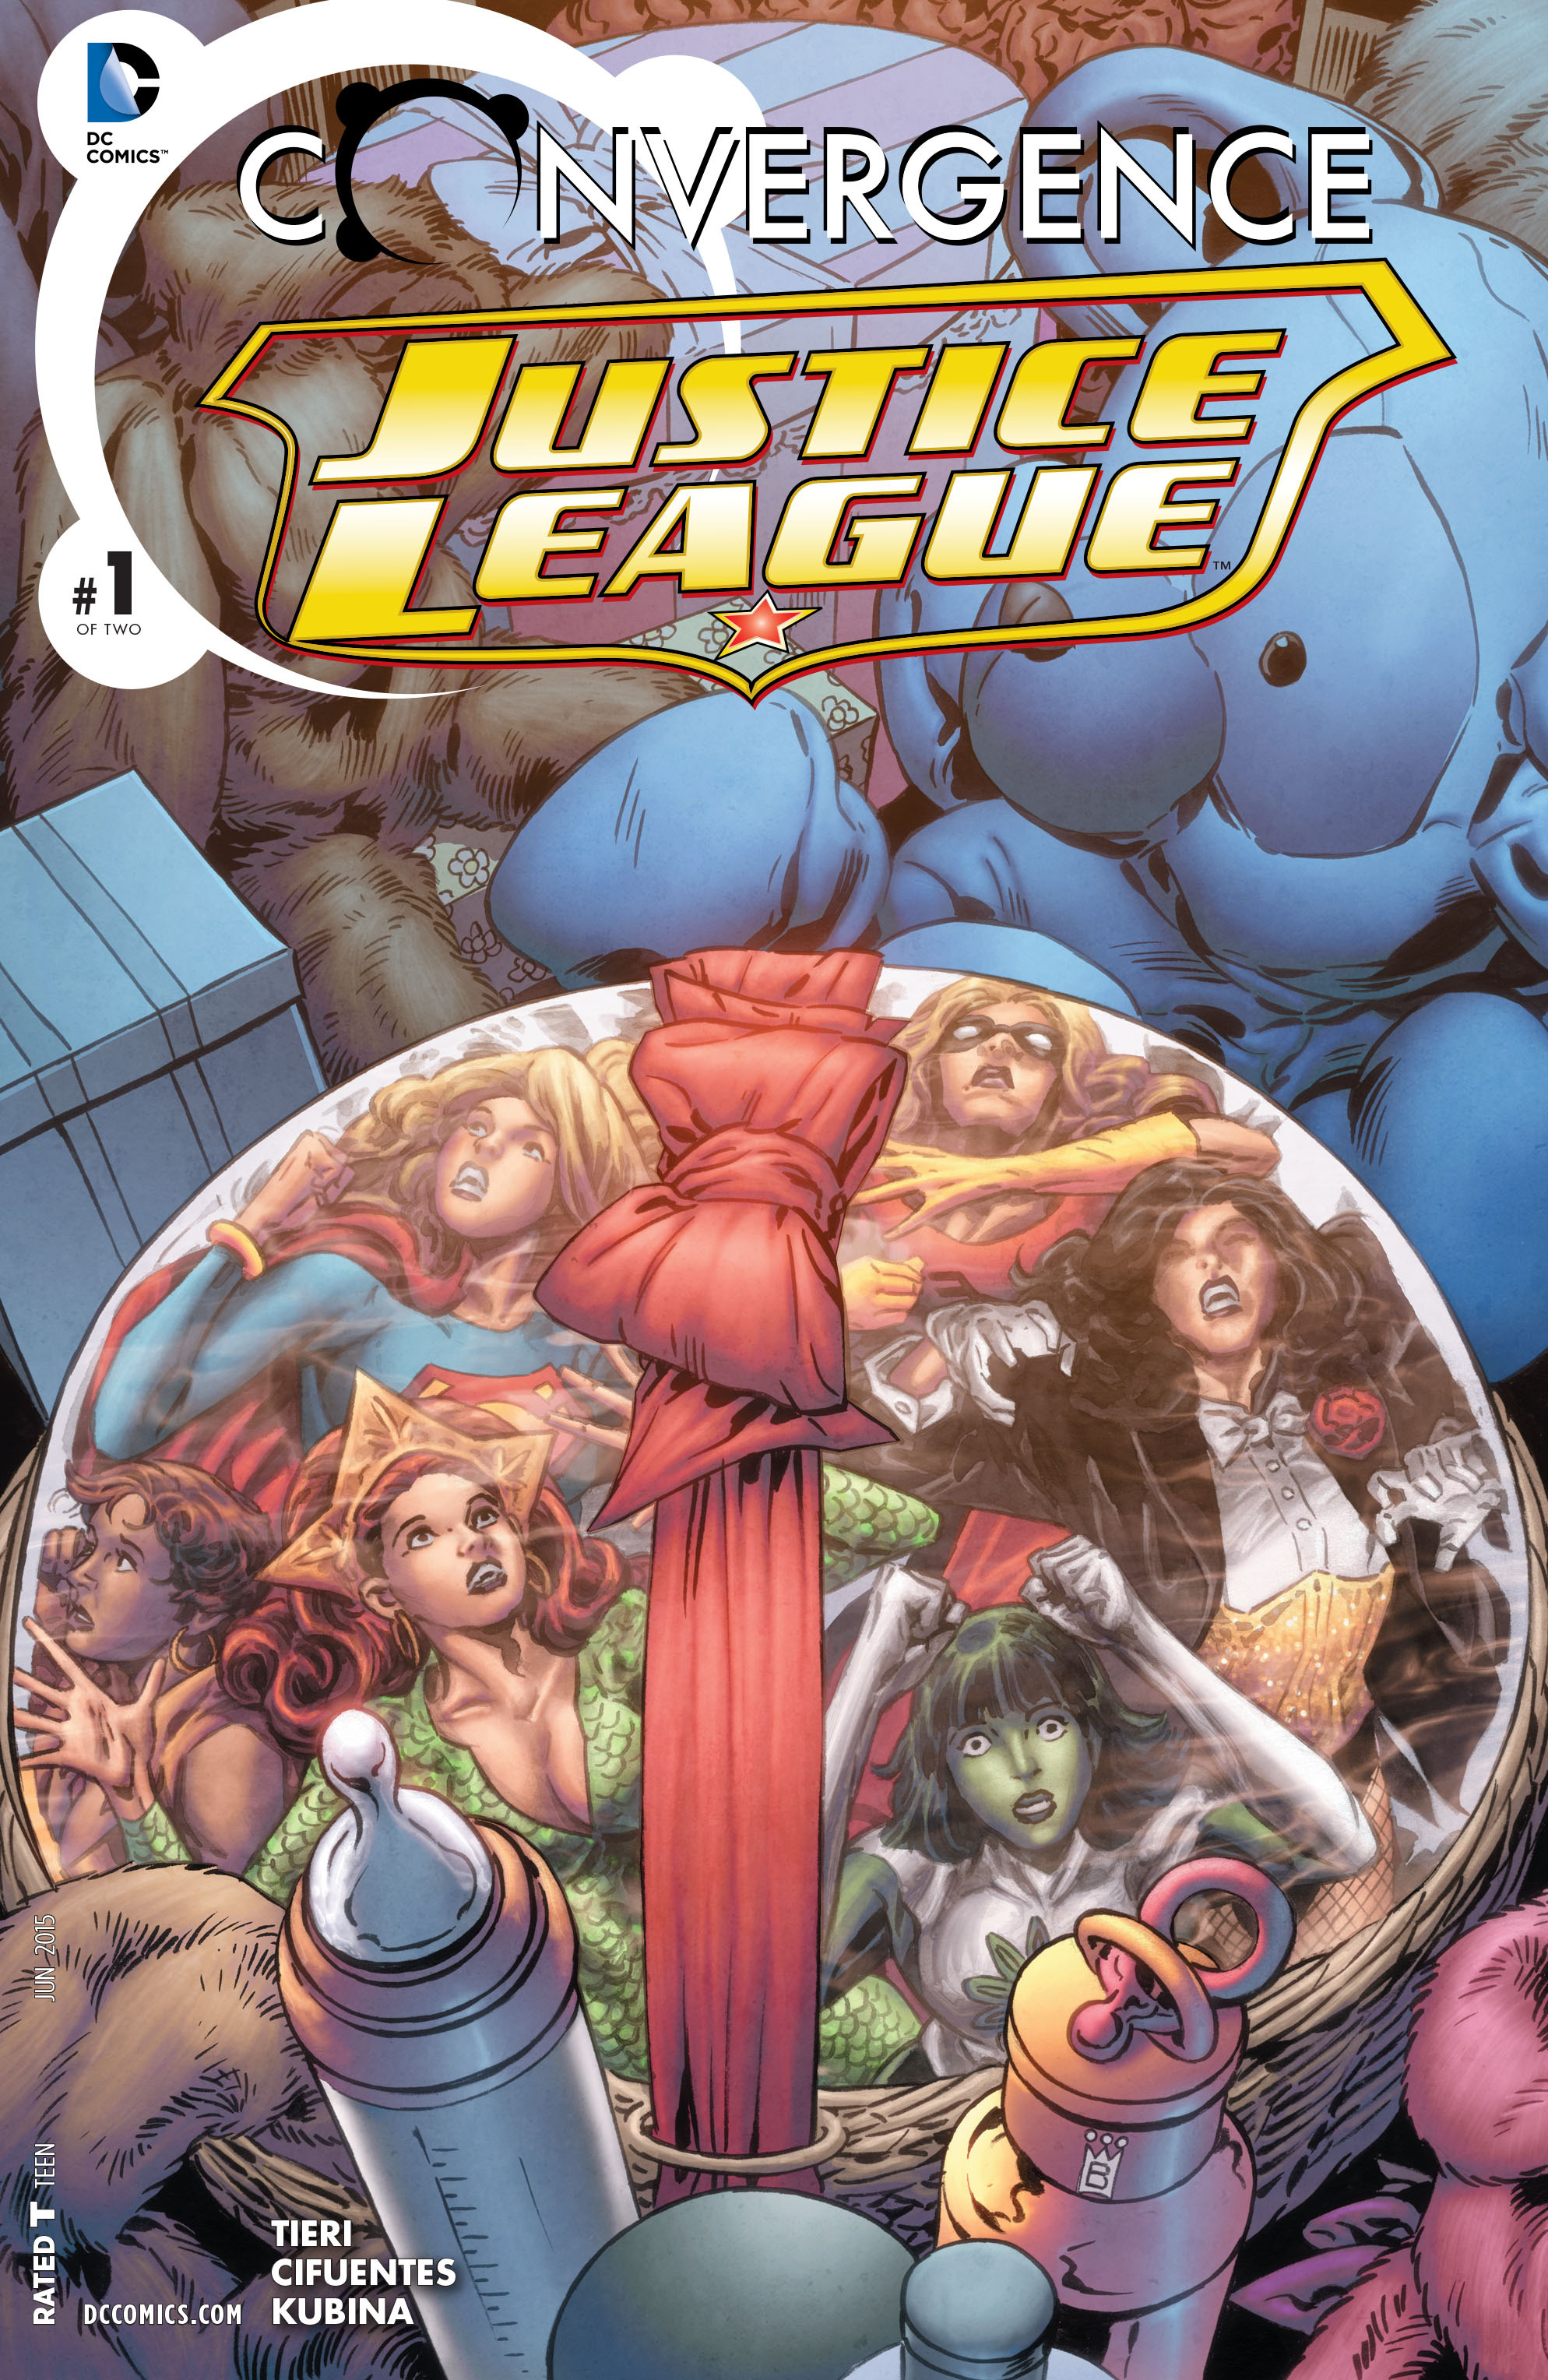 Read online Convergence Justice League comic -  Issue #1 - 1